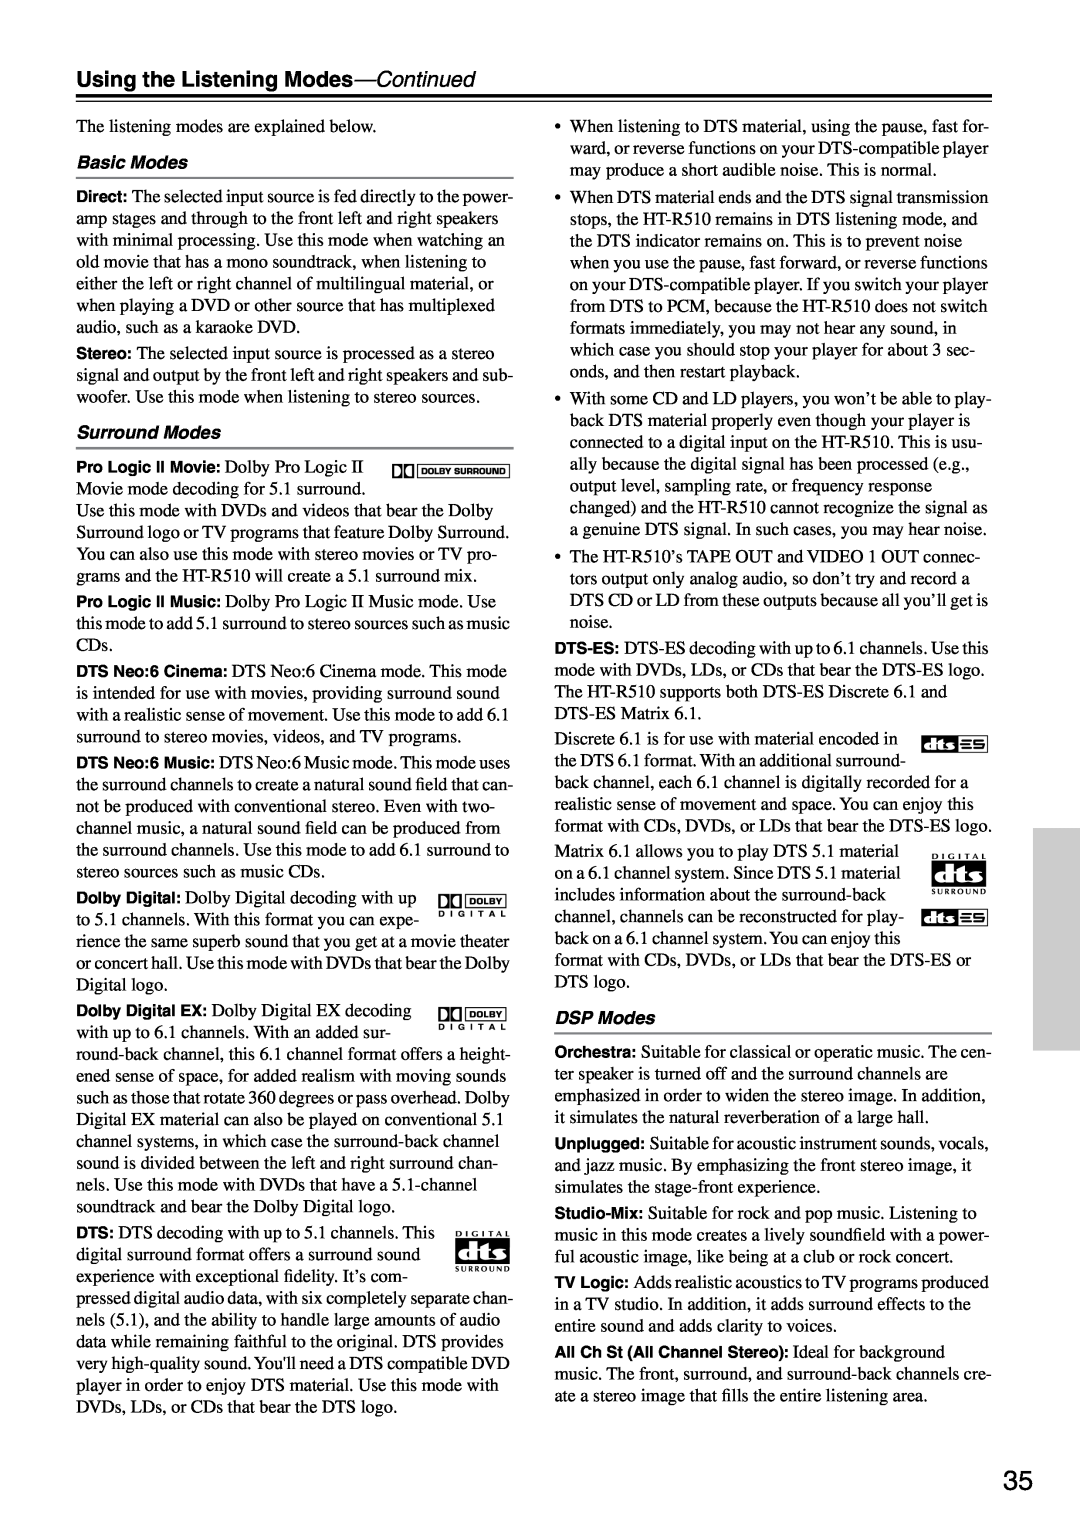 Onkyo HT-R510 instruction manual Using the Listening Modes-Continued, Basic Modes, Surround Modes, DSP Modes 